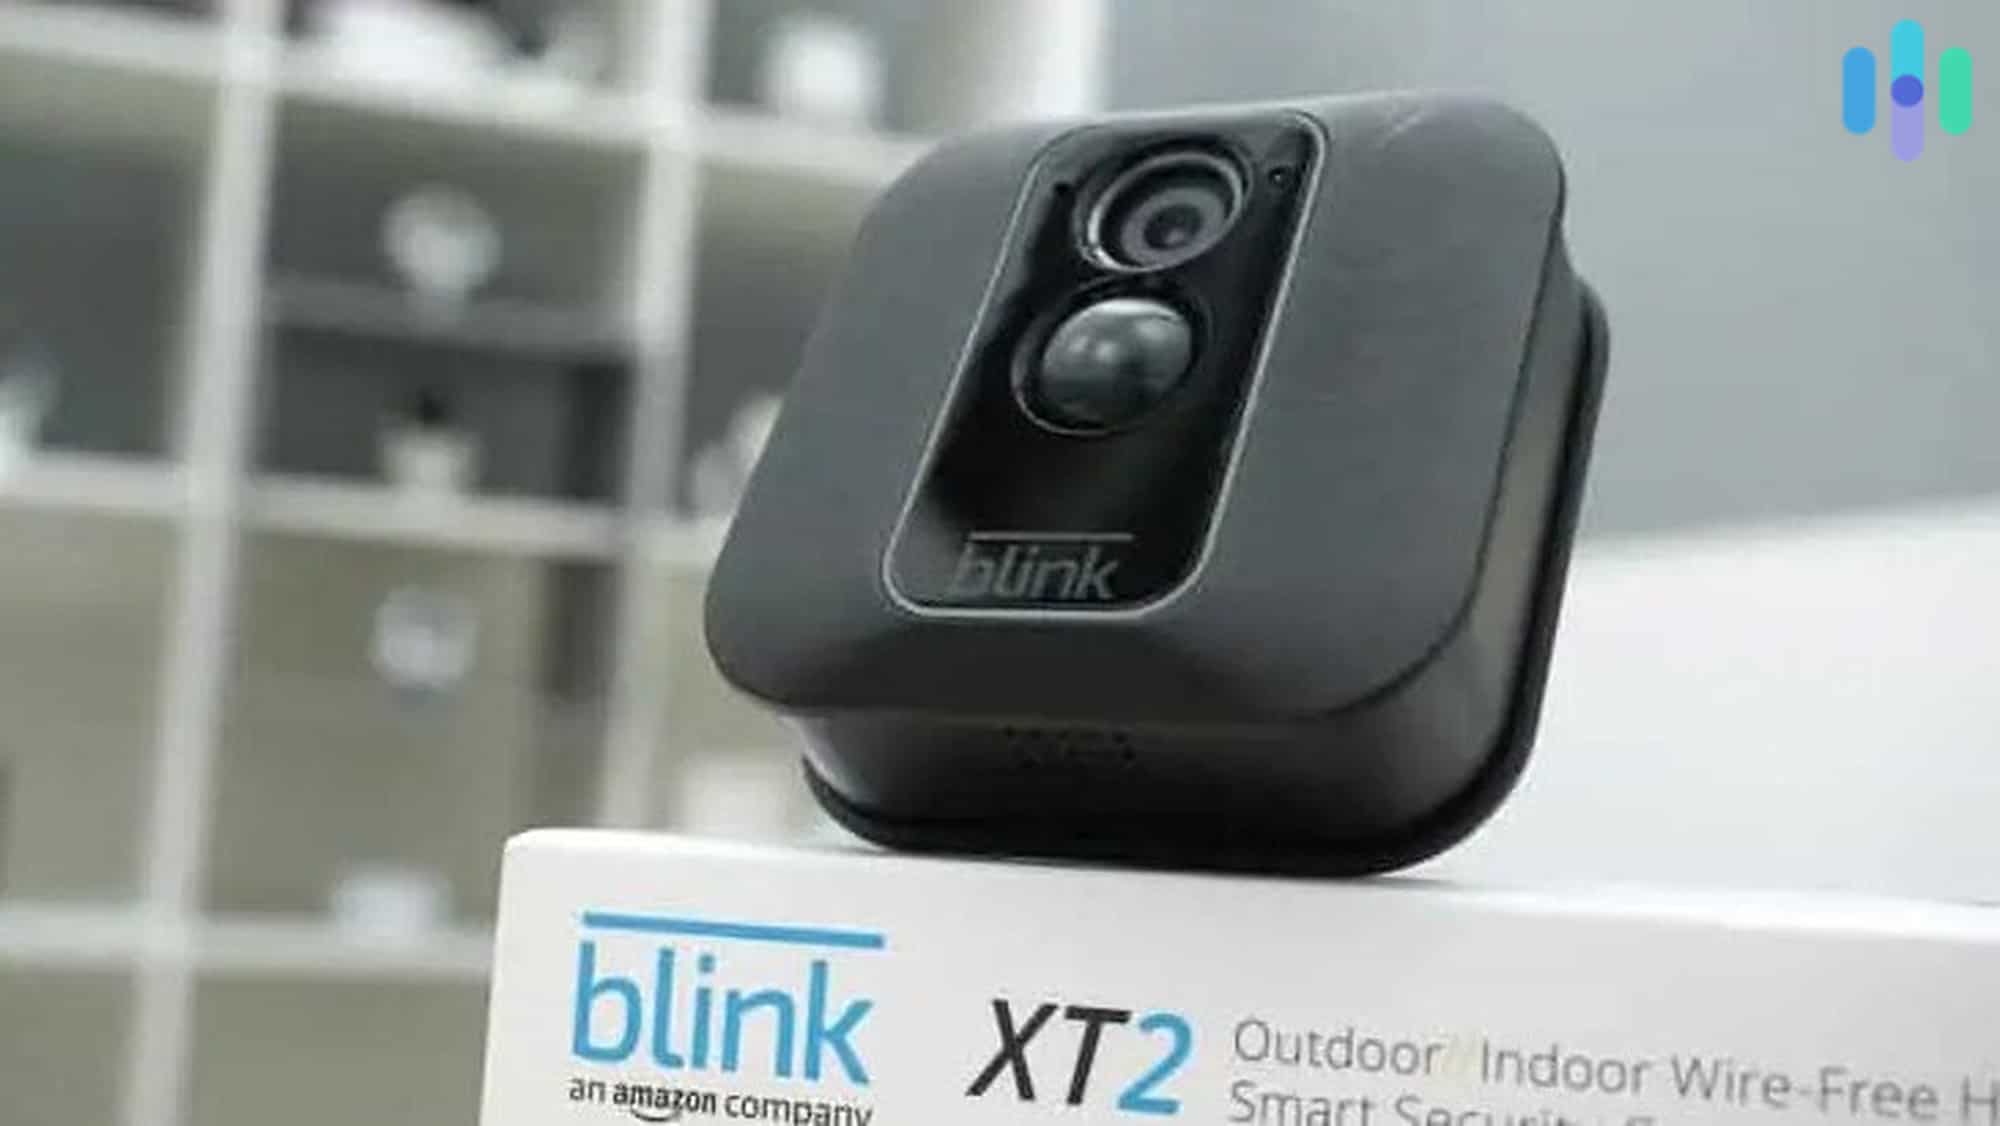 Blink XT2 2-camera security system is $45 off for Prime members